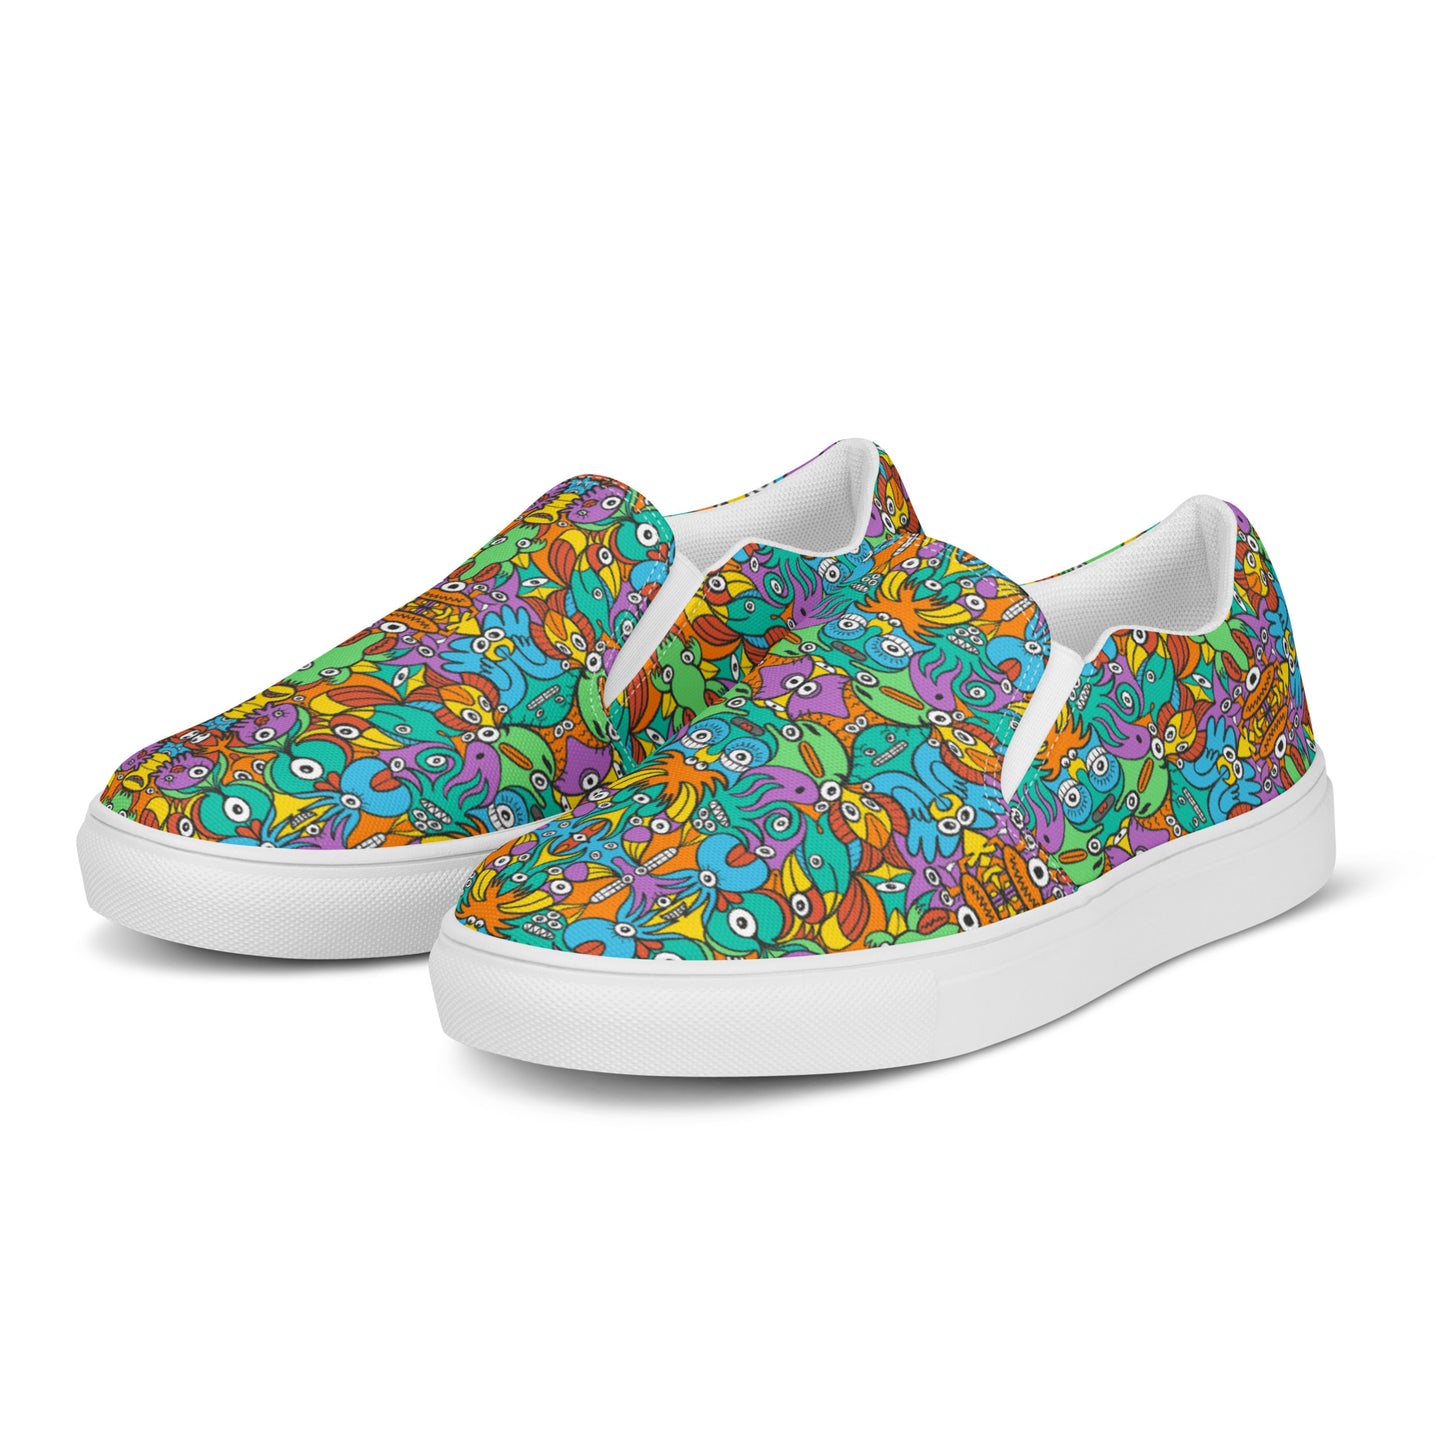 Fantastic doodle world full of weird creatures Men’s slip-on canvas shoes. Overview